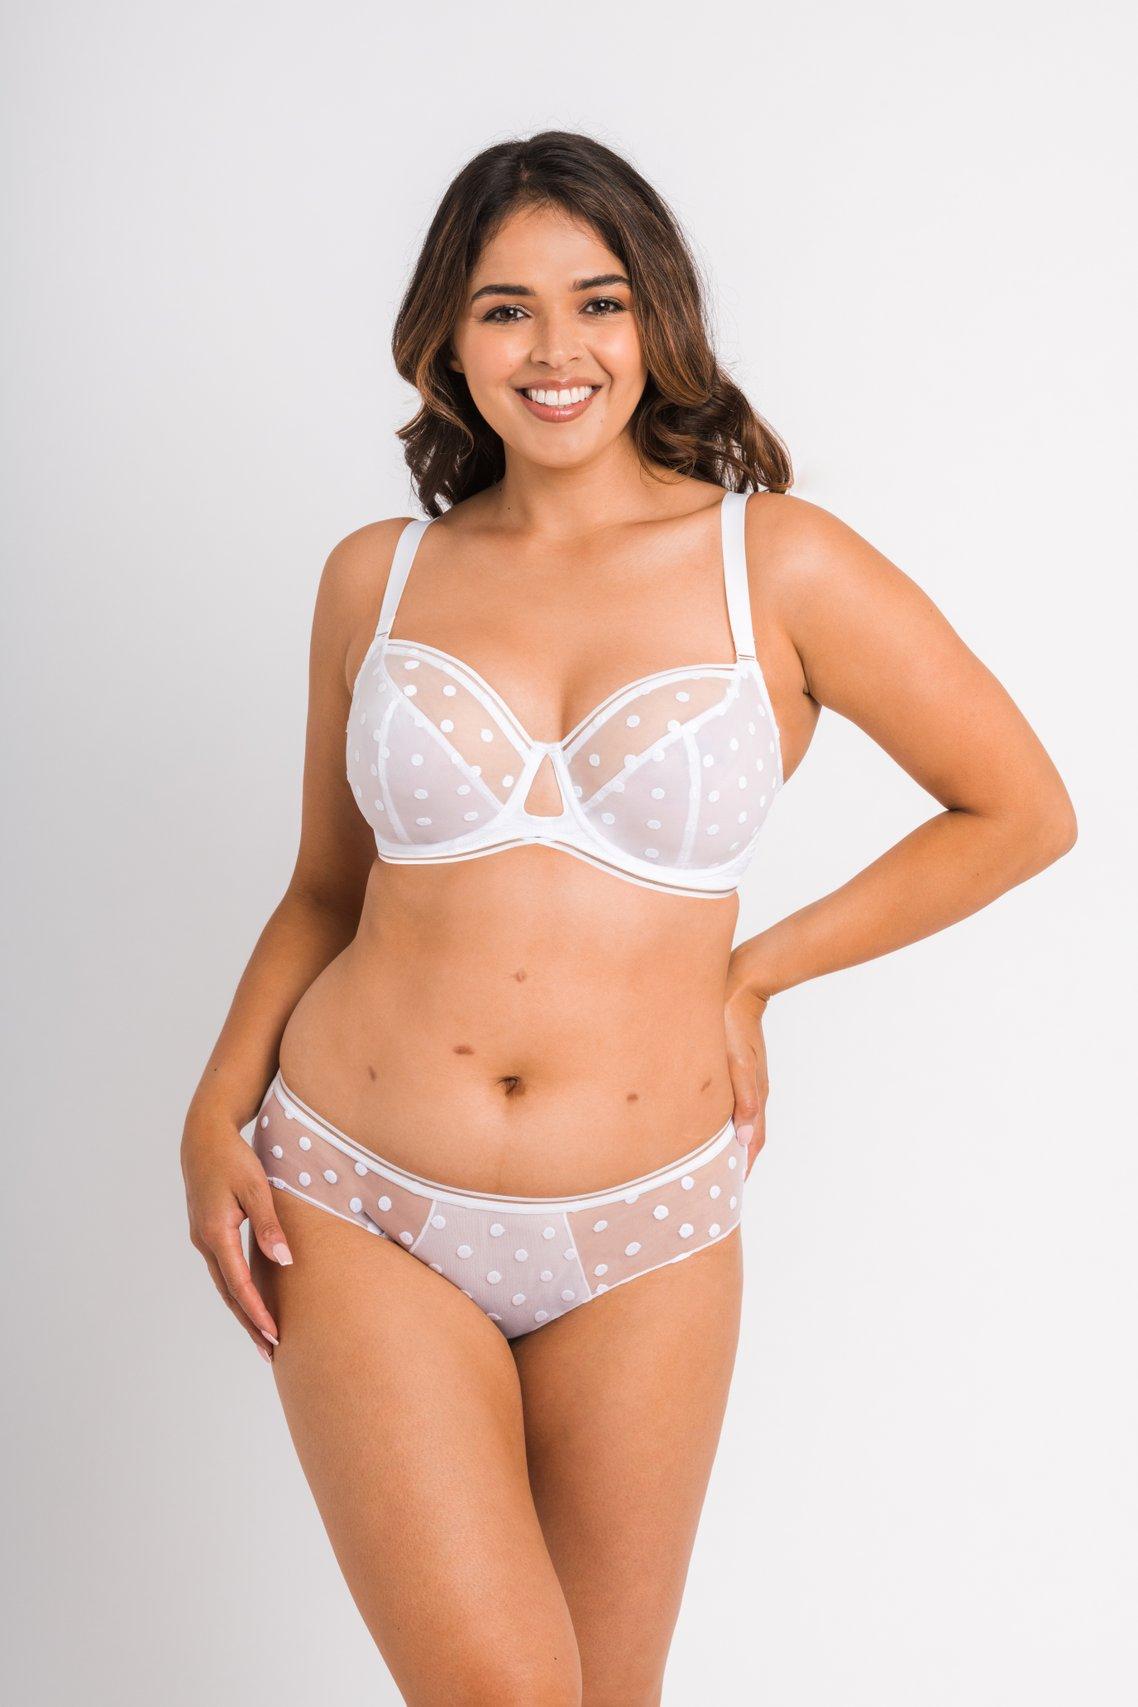 Plus Size Lingerie: 28 Stunning Sets & How to Choose - hitched.co.uk